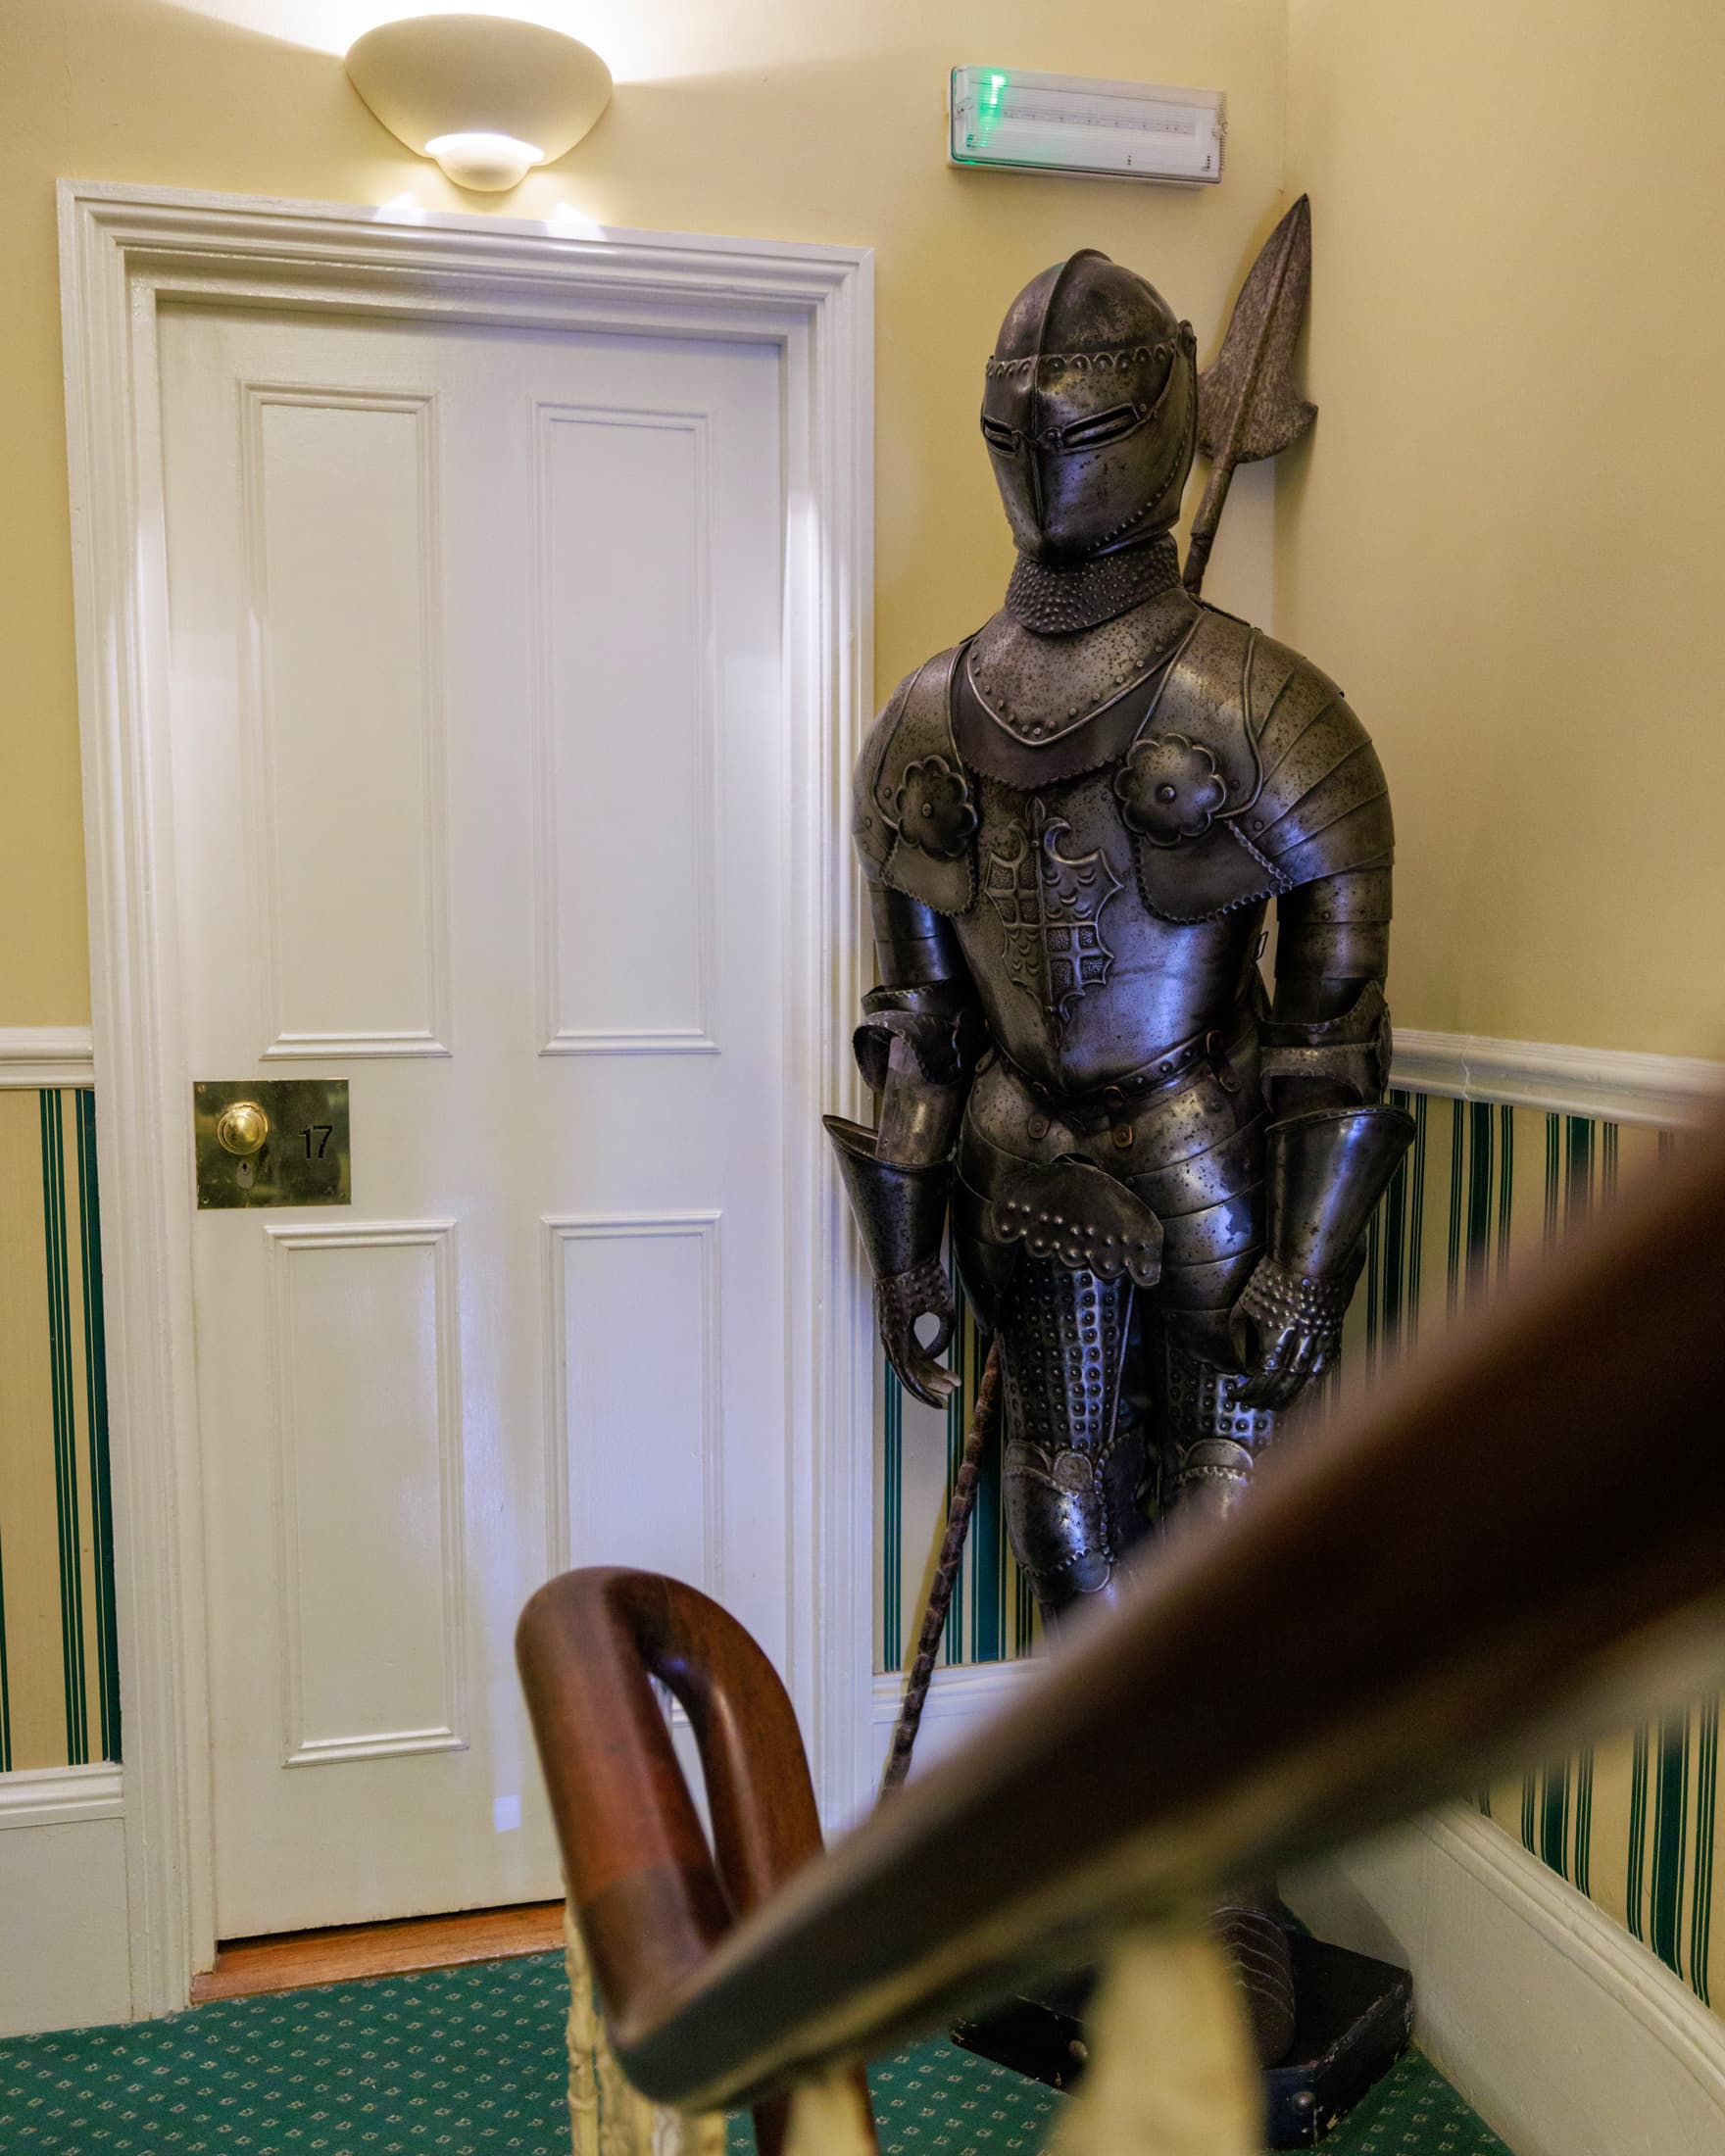 Knight guard armour statue